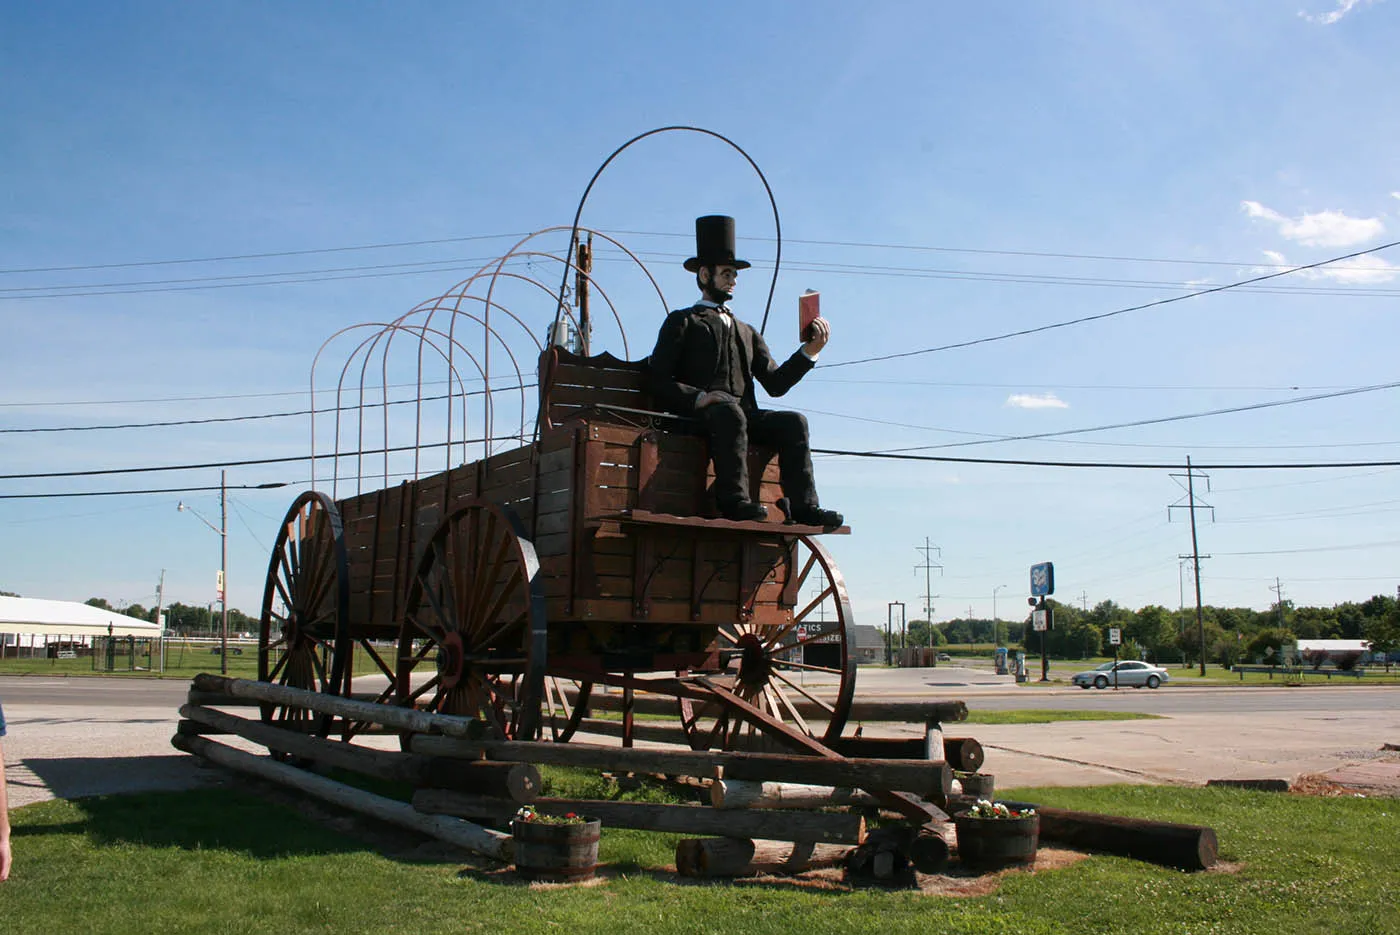 Lincoln on the World's Largest Covered Wagon in Lincoln, Illinois